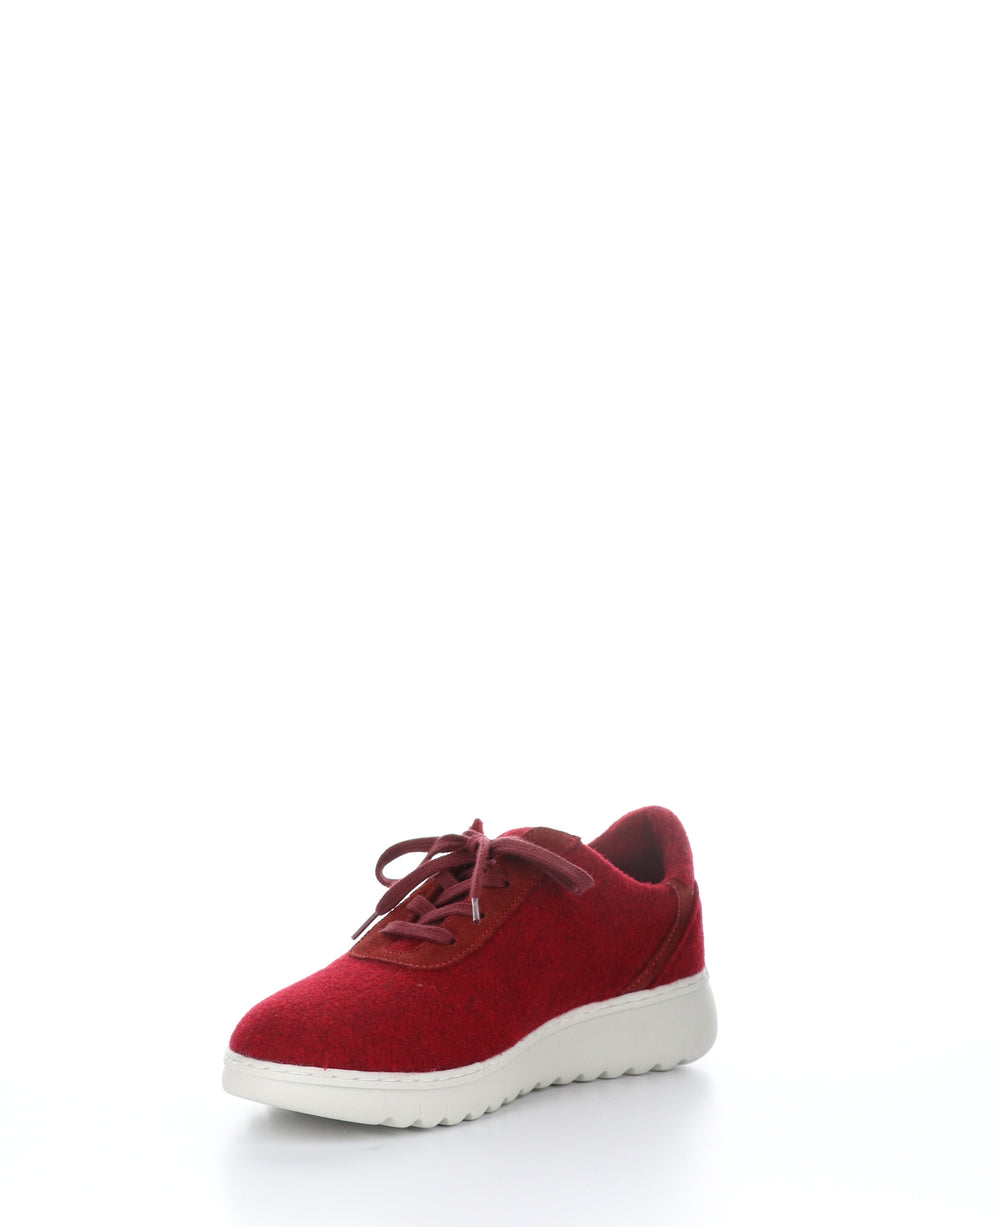 ELRA670SOF Red Round Toe Shoes